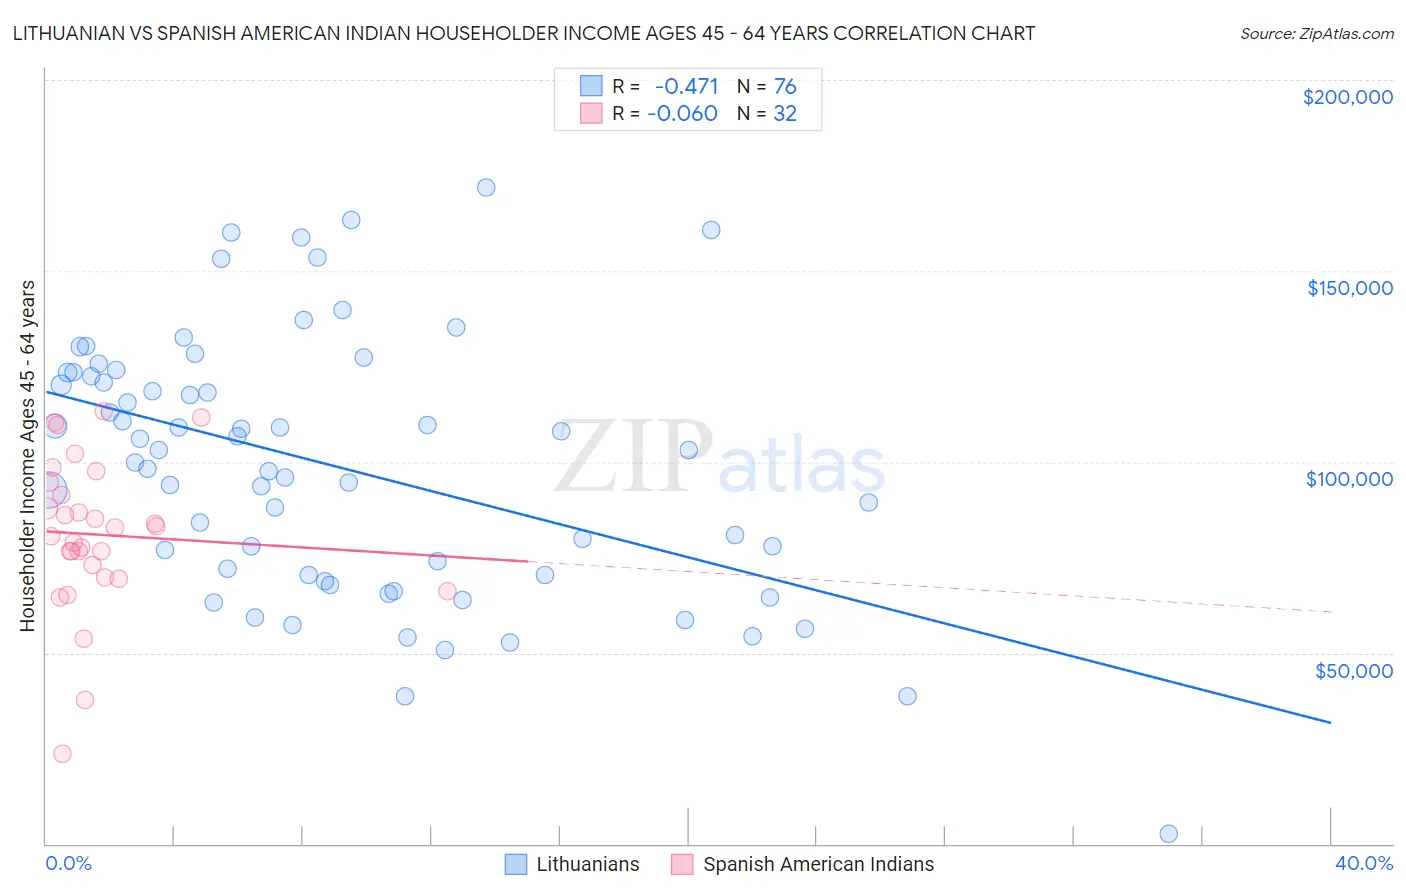 Lithuanian vs Spanish American Indian Householder Income Ages 45 - 64 years